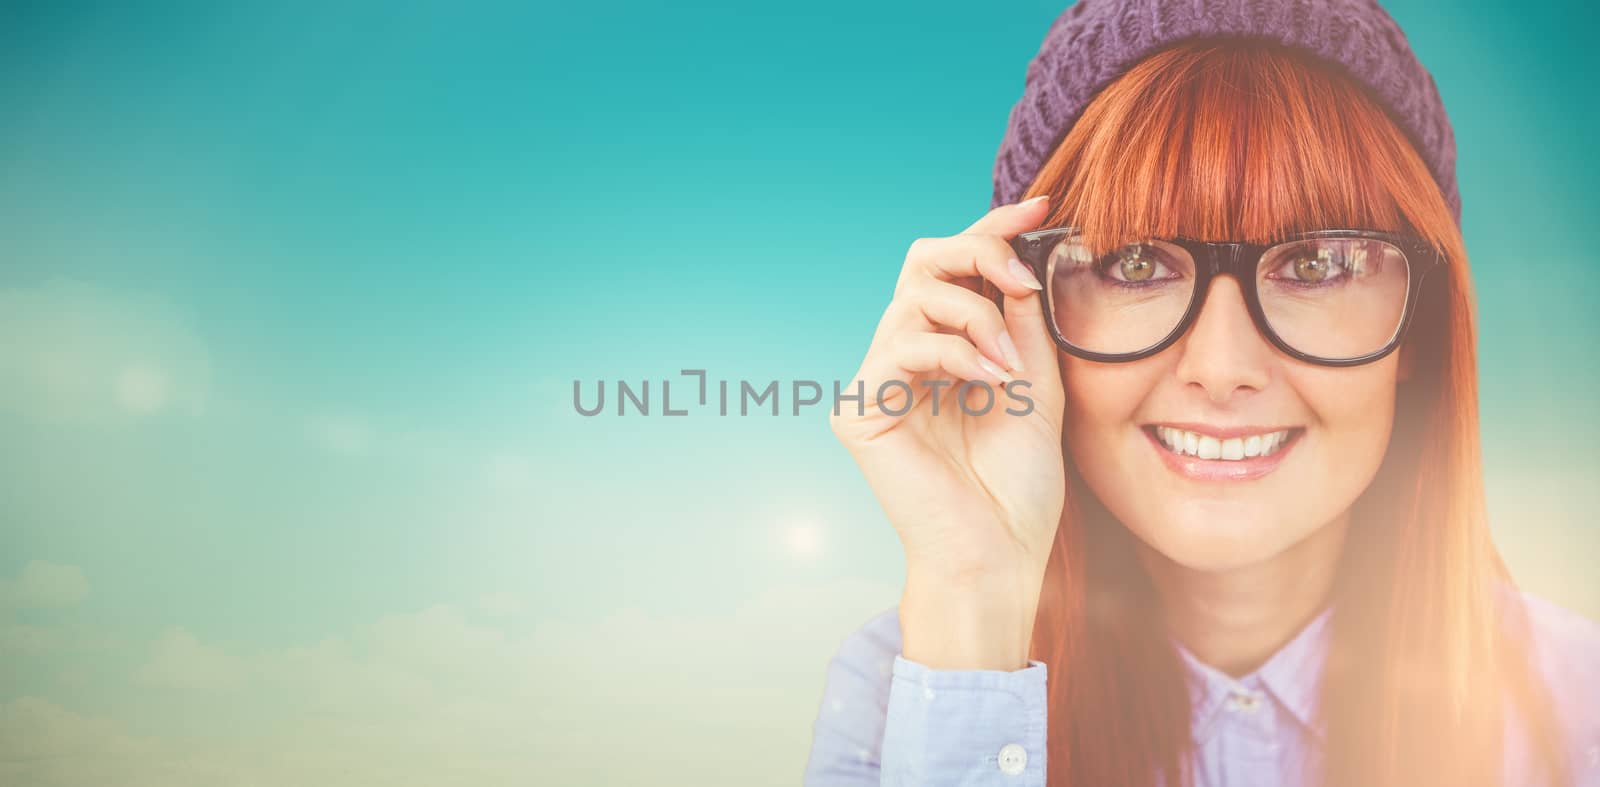 Smiling hipster woman looking at camera against blue green background